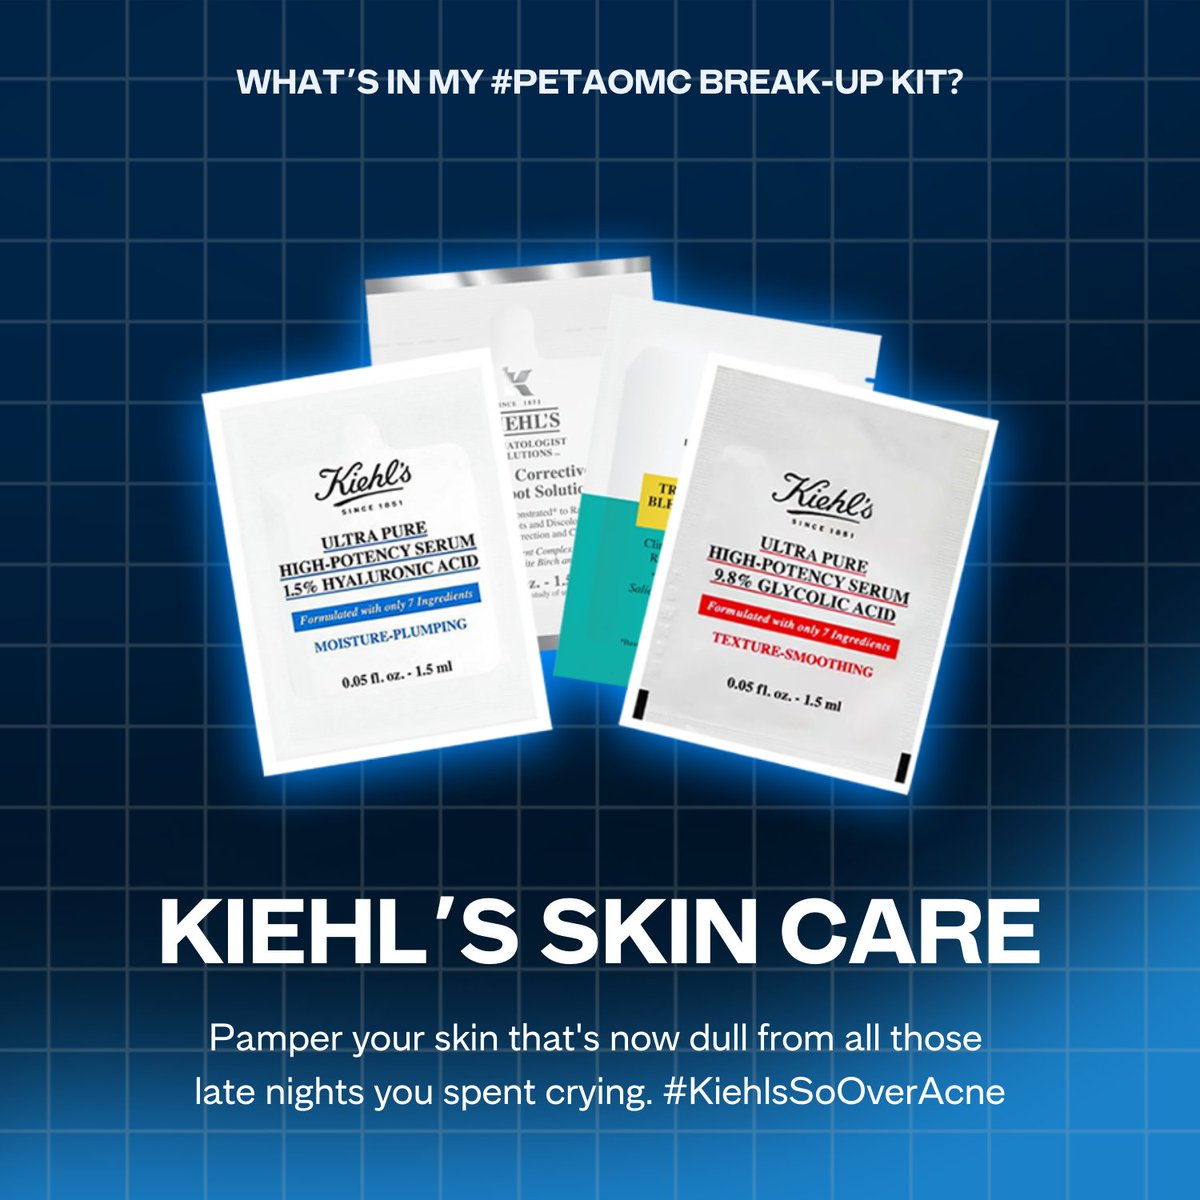 Bounce back from your heartbreak with the exclusive #PETAOneMoreChance Break-up Kit! 📦💙

Sanicare Hankies • Biogesic Tablets • Kiehl's Skin Care